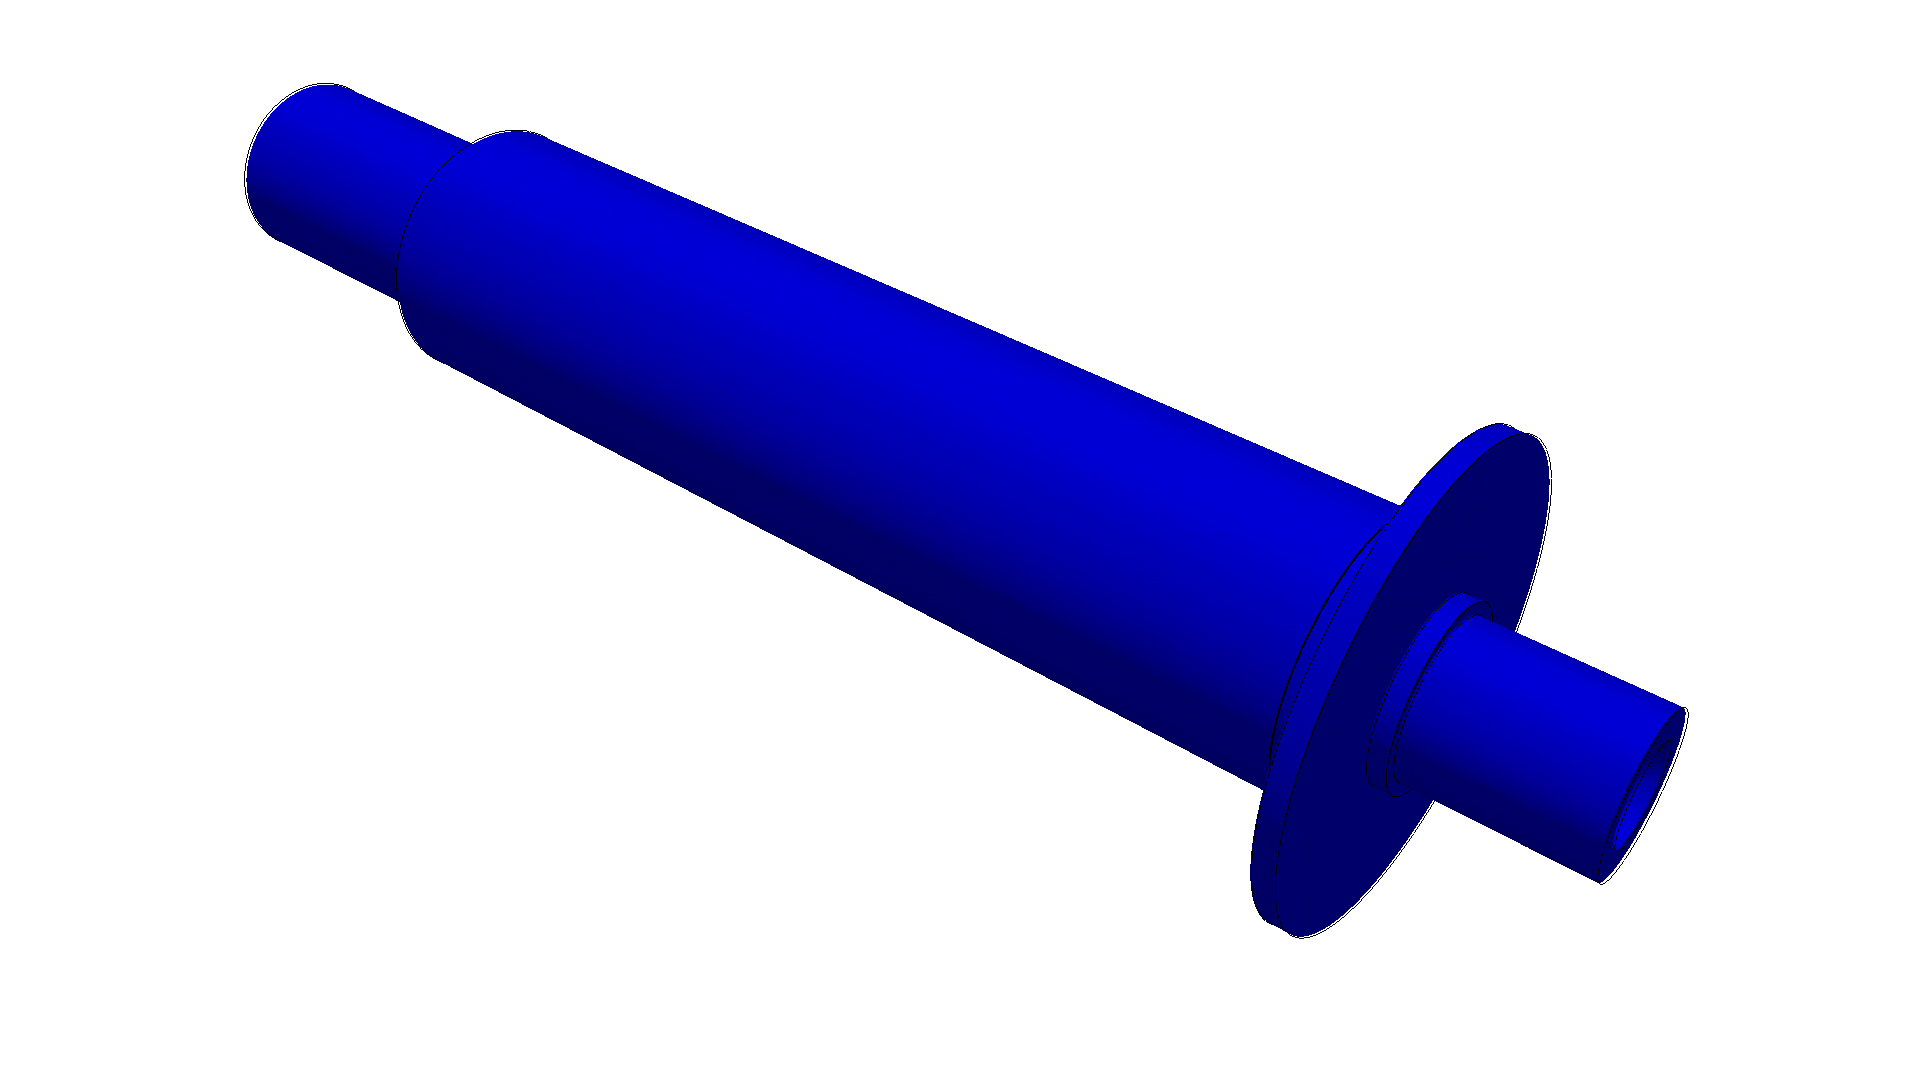 Third natural mode: rotation, radial expansion, FEA of a spindle by Carbomech with SimScale